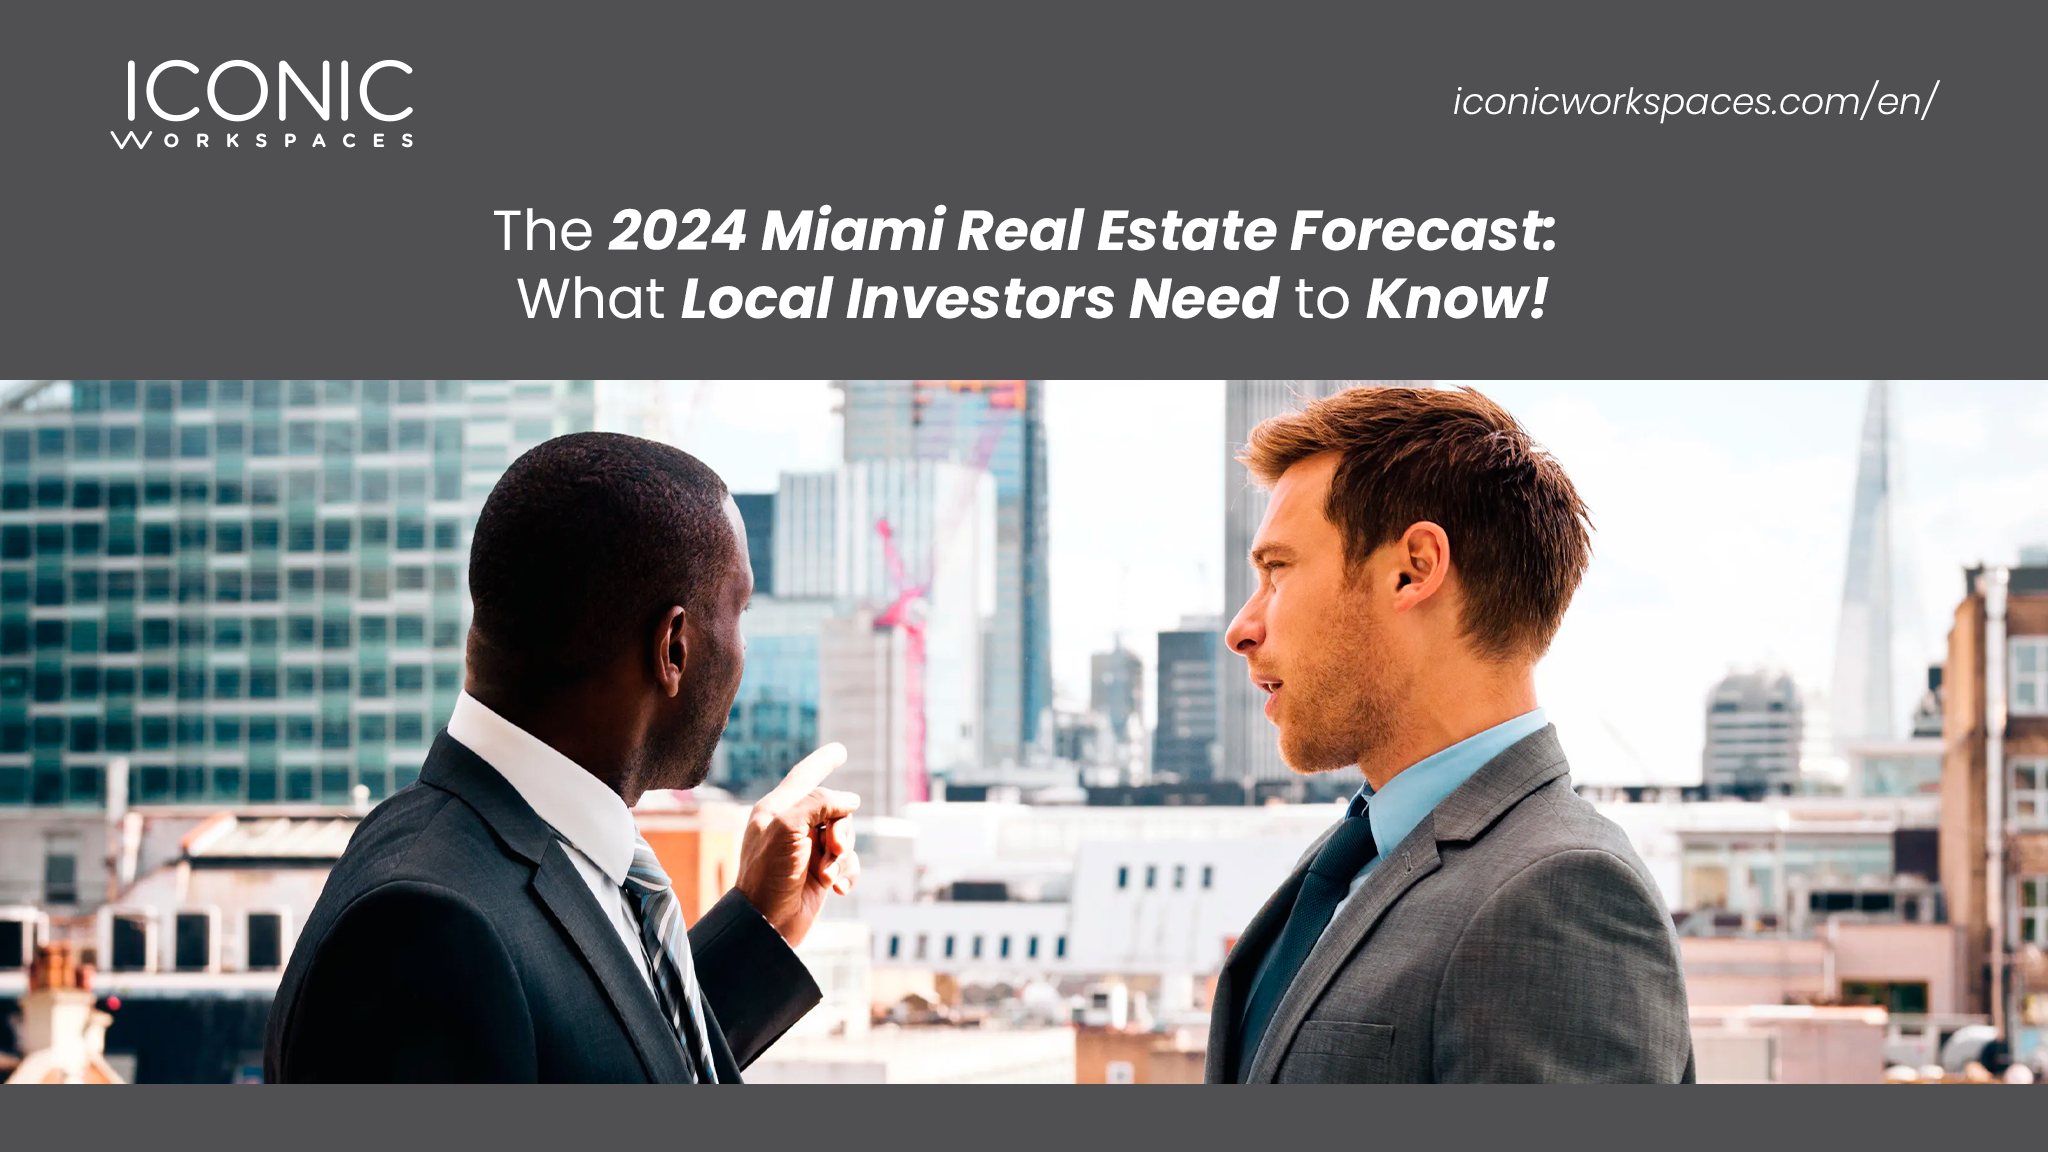 The 2024 Miami Real Estate Forecast: What Local Investors Need to Know